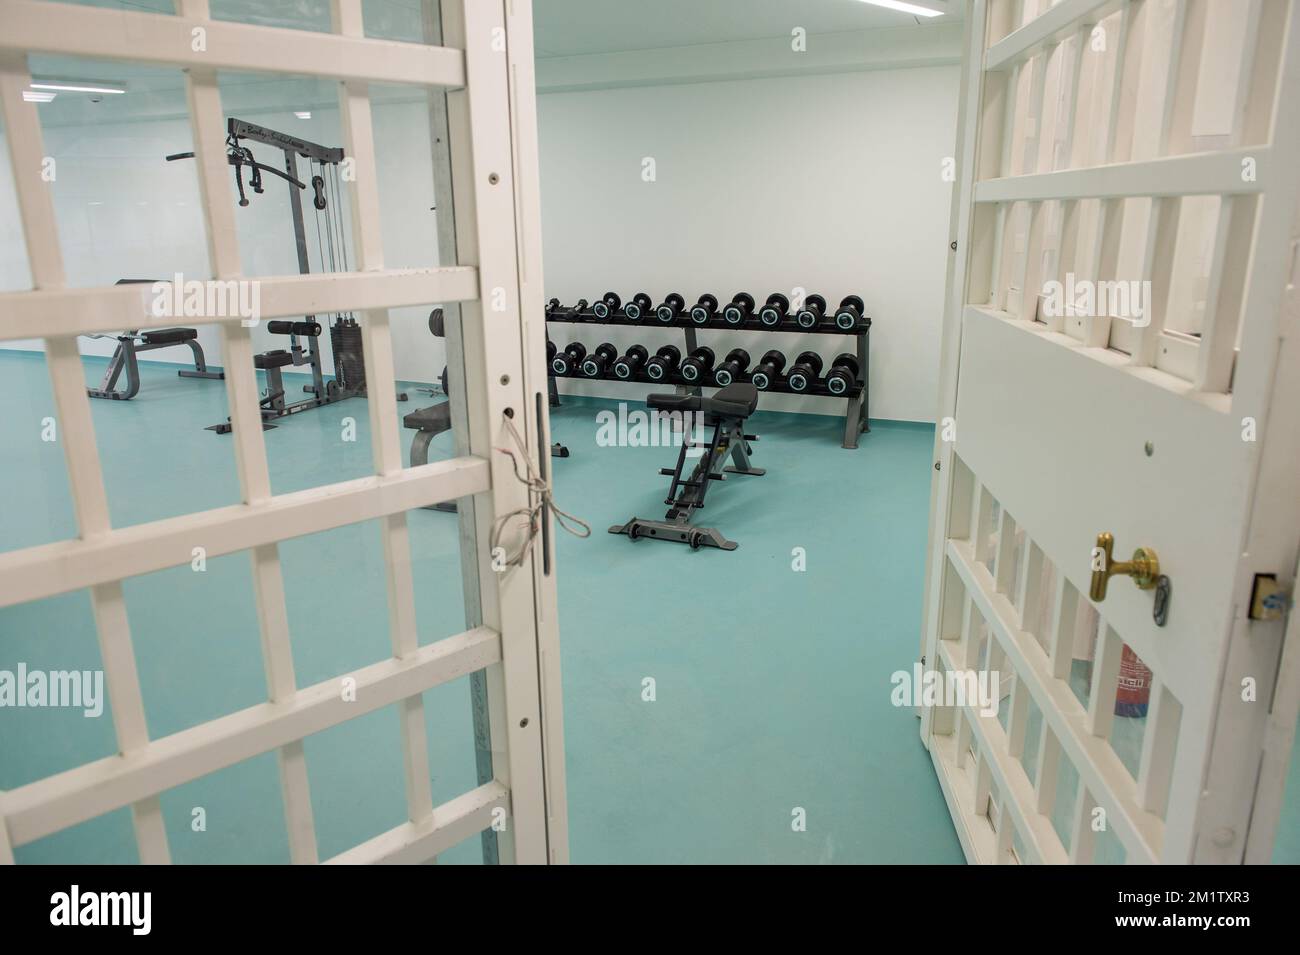 20140214 - BEVEREN-WAAS, BELGIUM: Illustration picture shows a fitness area during the official opening of the new jail in Melsele, Beveren, which is one of the four new prisons planned in Belgium to enlarge the number of cells. BELGA PHOTO JONAS ROOSENS Stock Photo